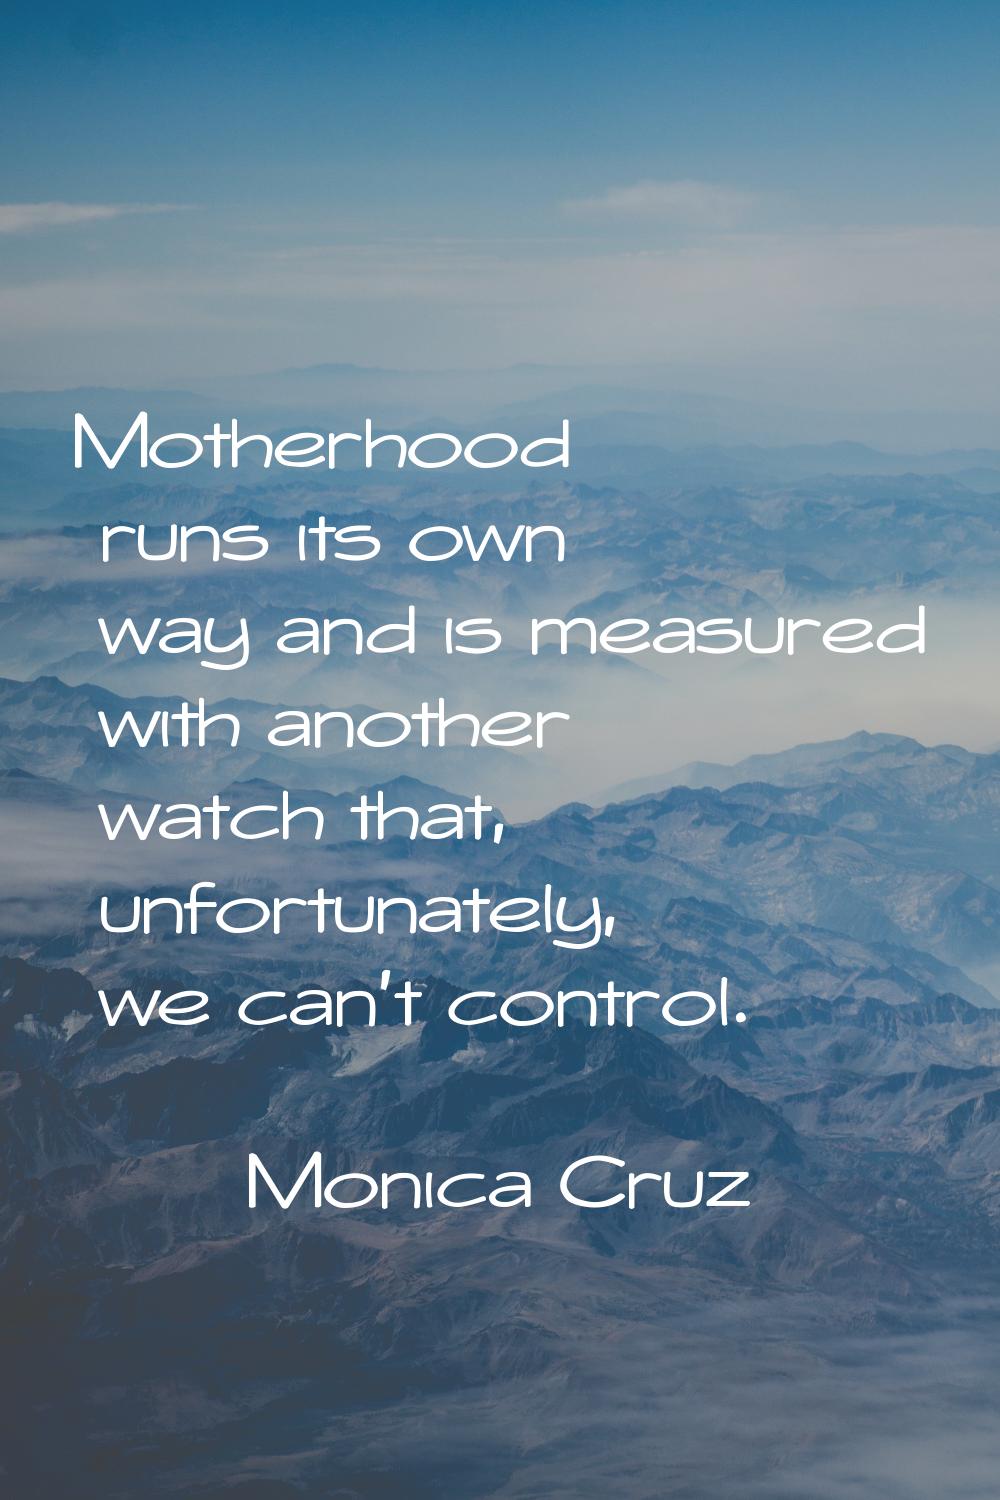 Motherhood runs its own way and is measured with another watch that, unfortunately, we can't contro